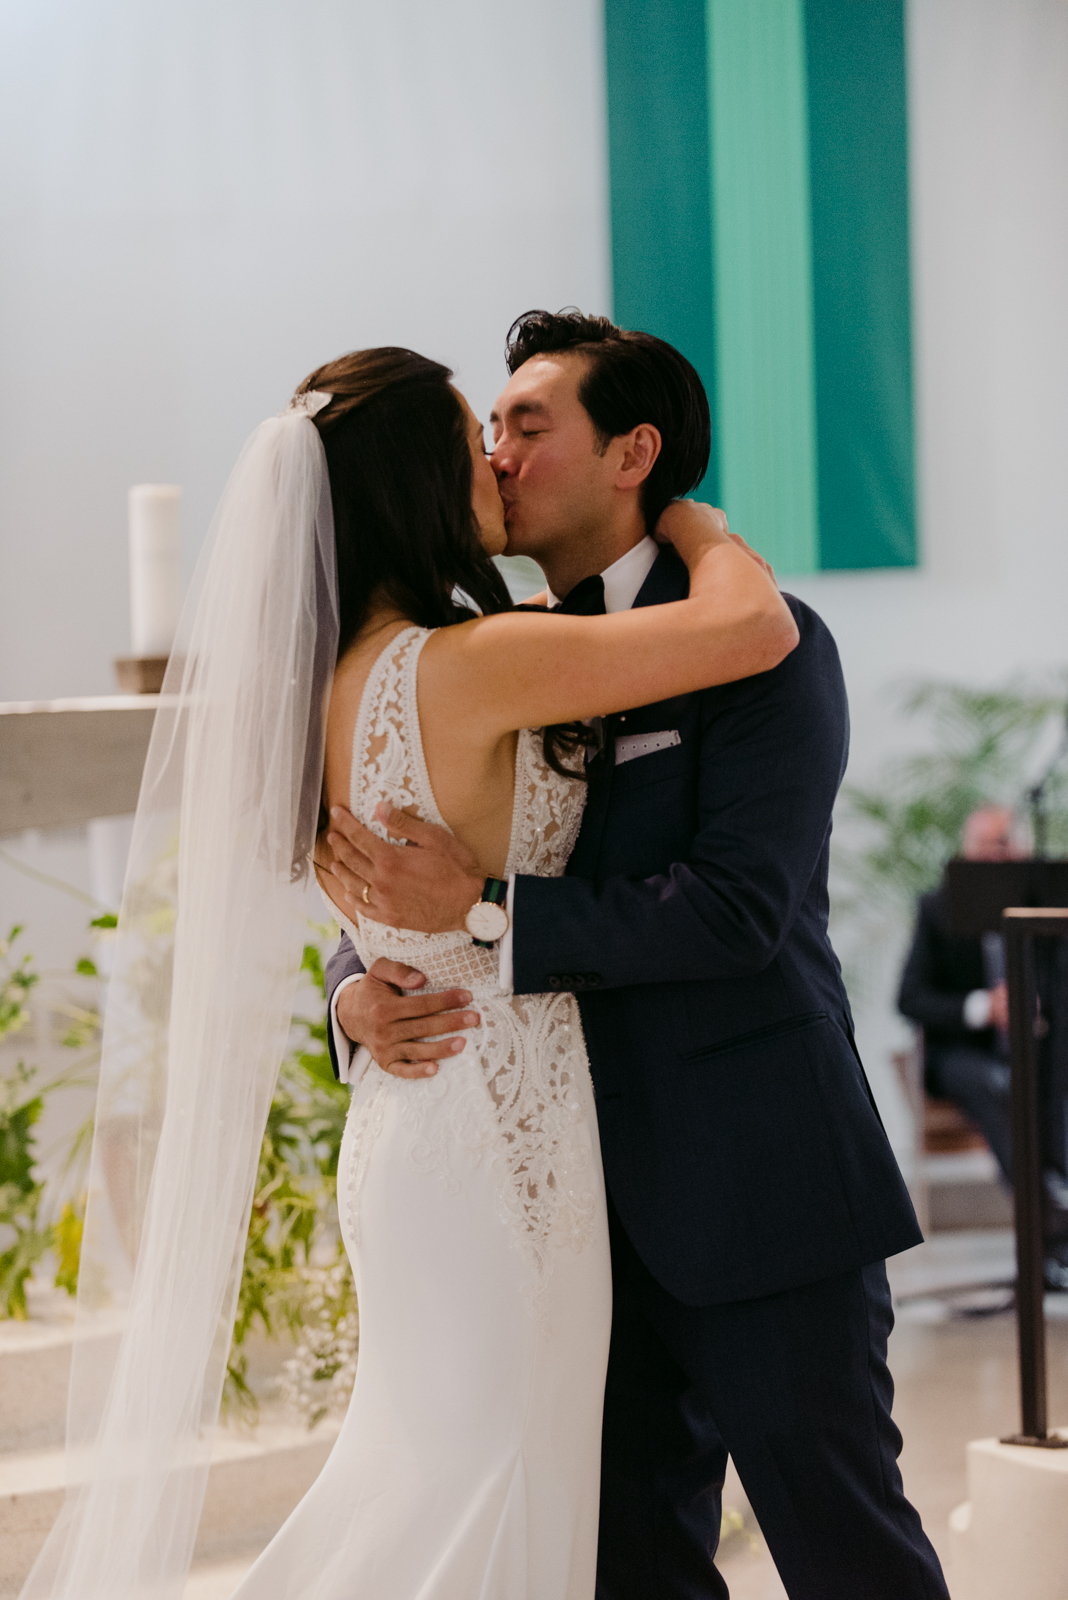 bride and groom first kiss during wedding ceremony at St Basil's Church